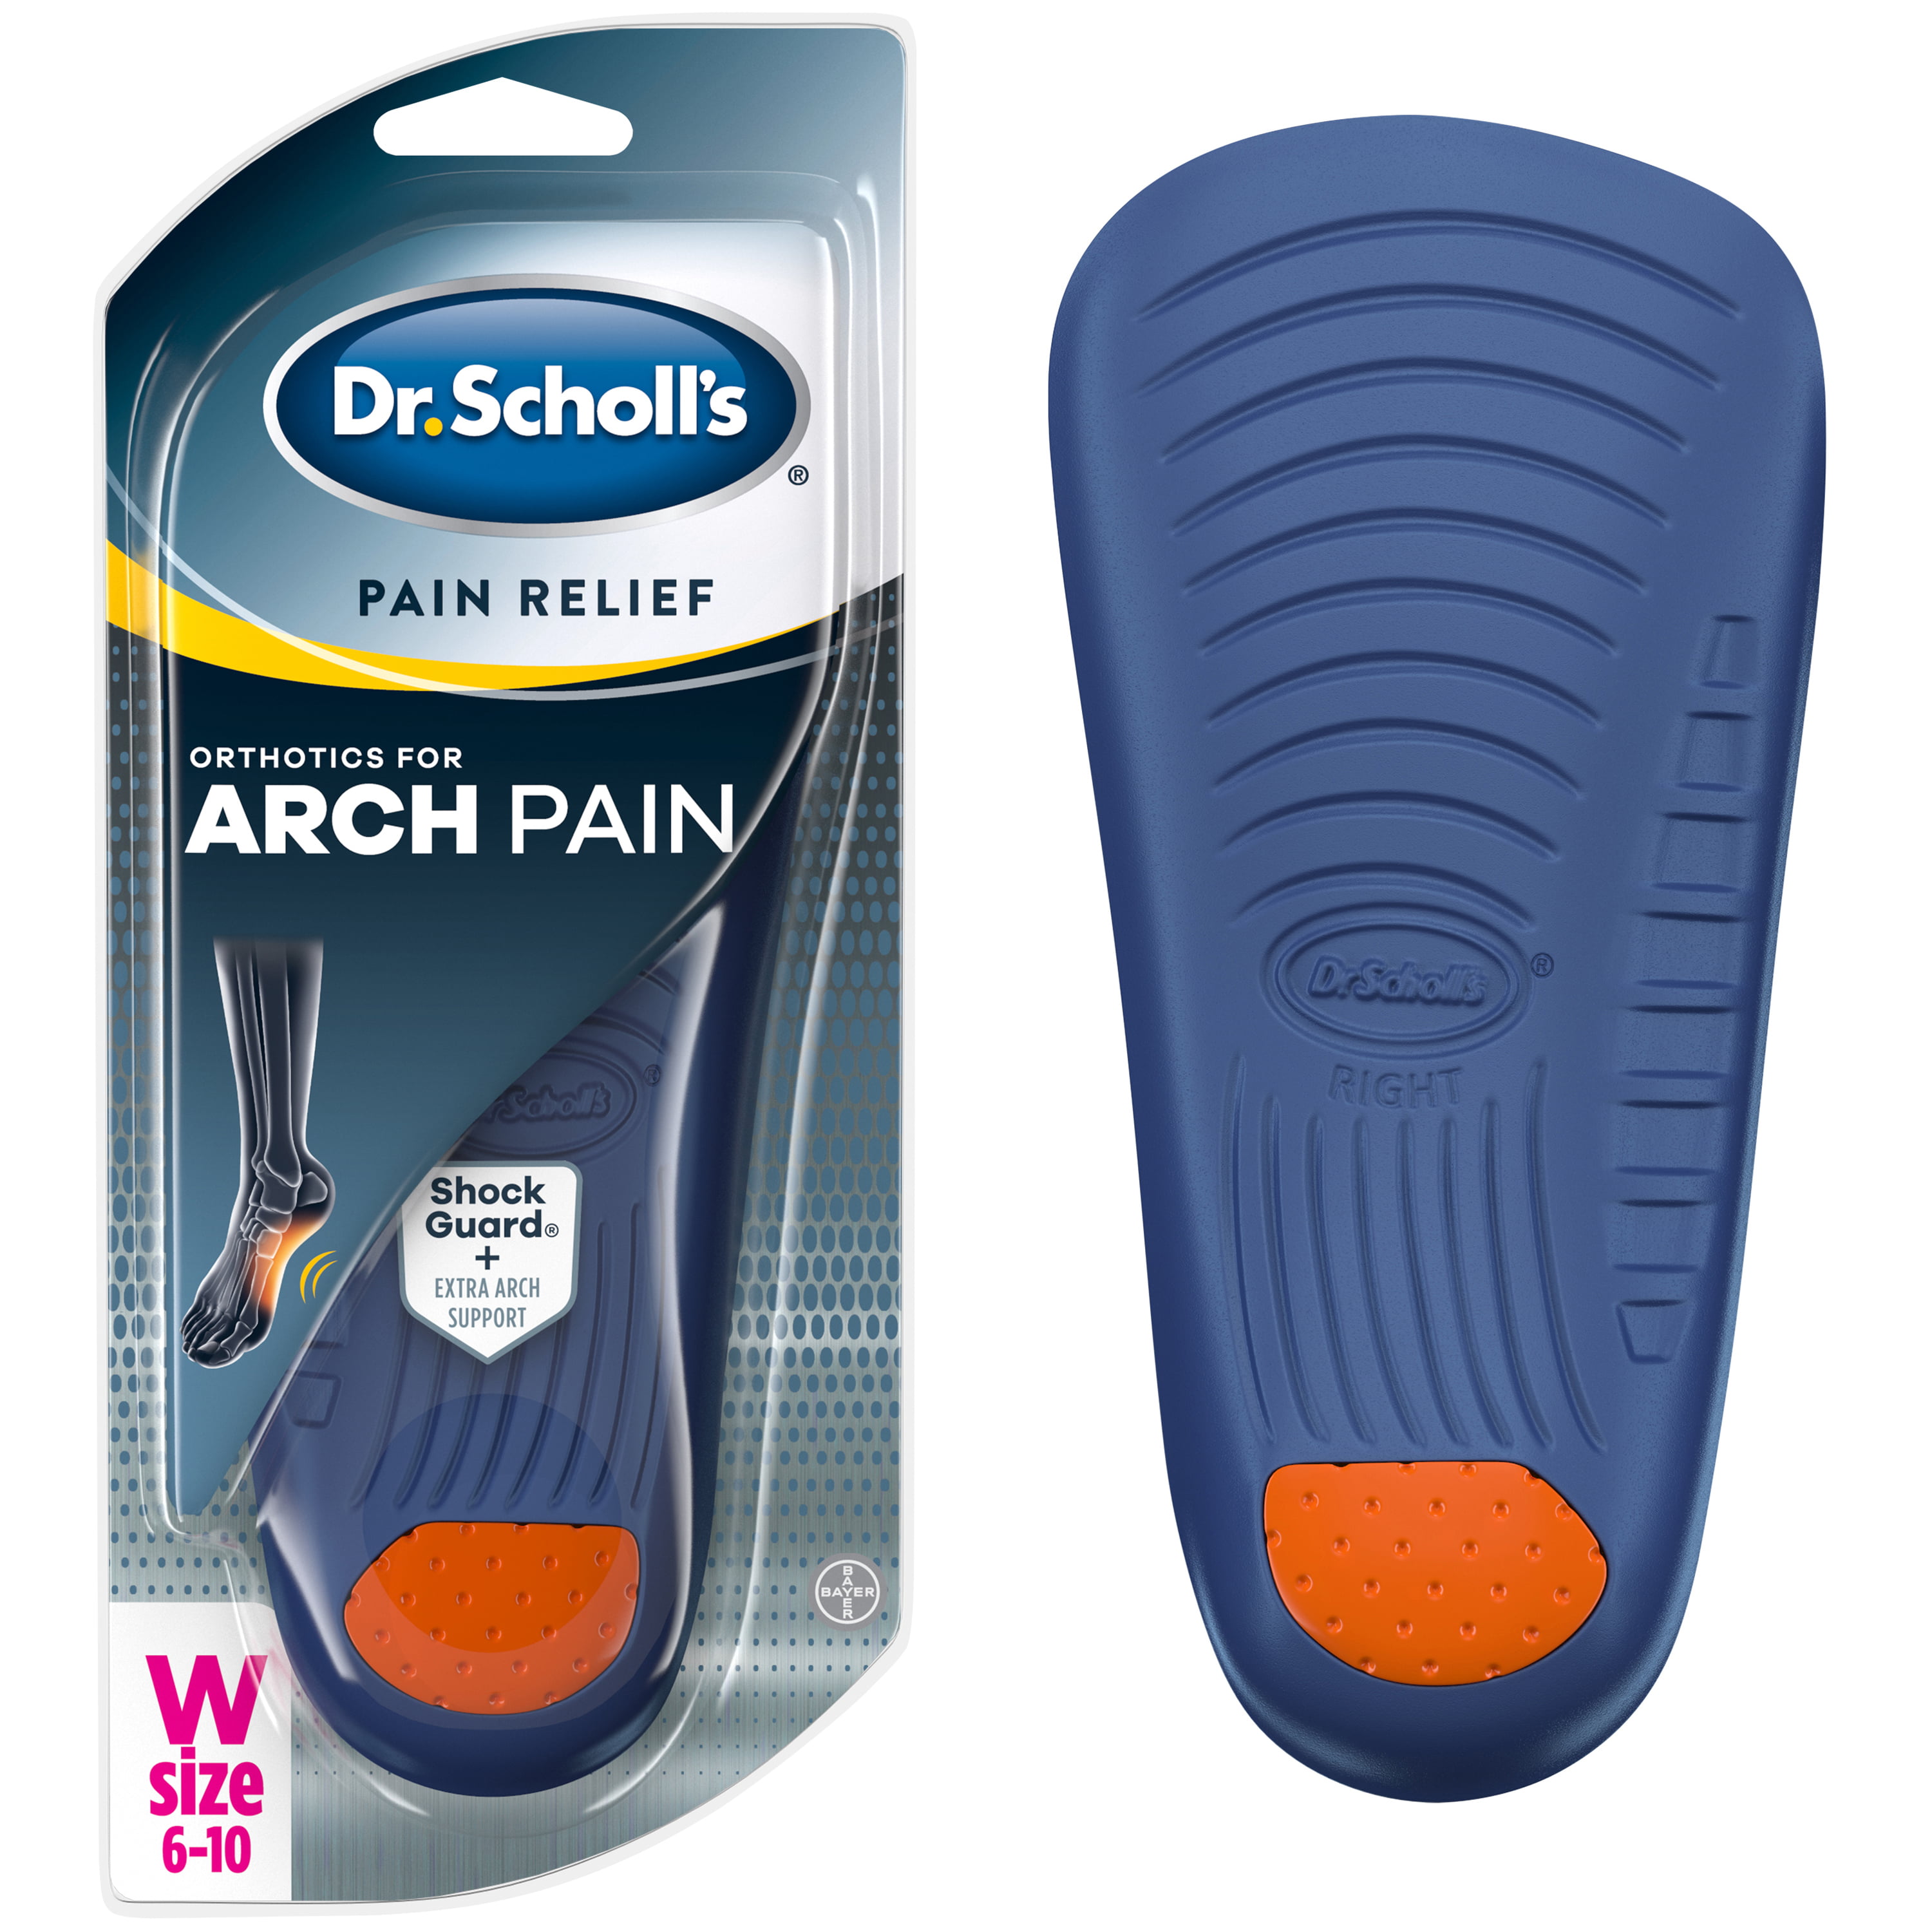 Dr. Scholl's Pain Relief Orthotics for Arch Pain for Women, 1 Pair ...